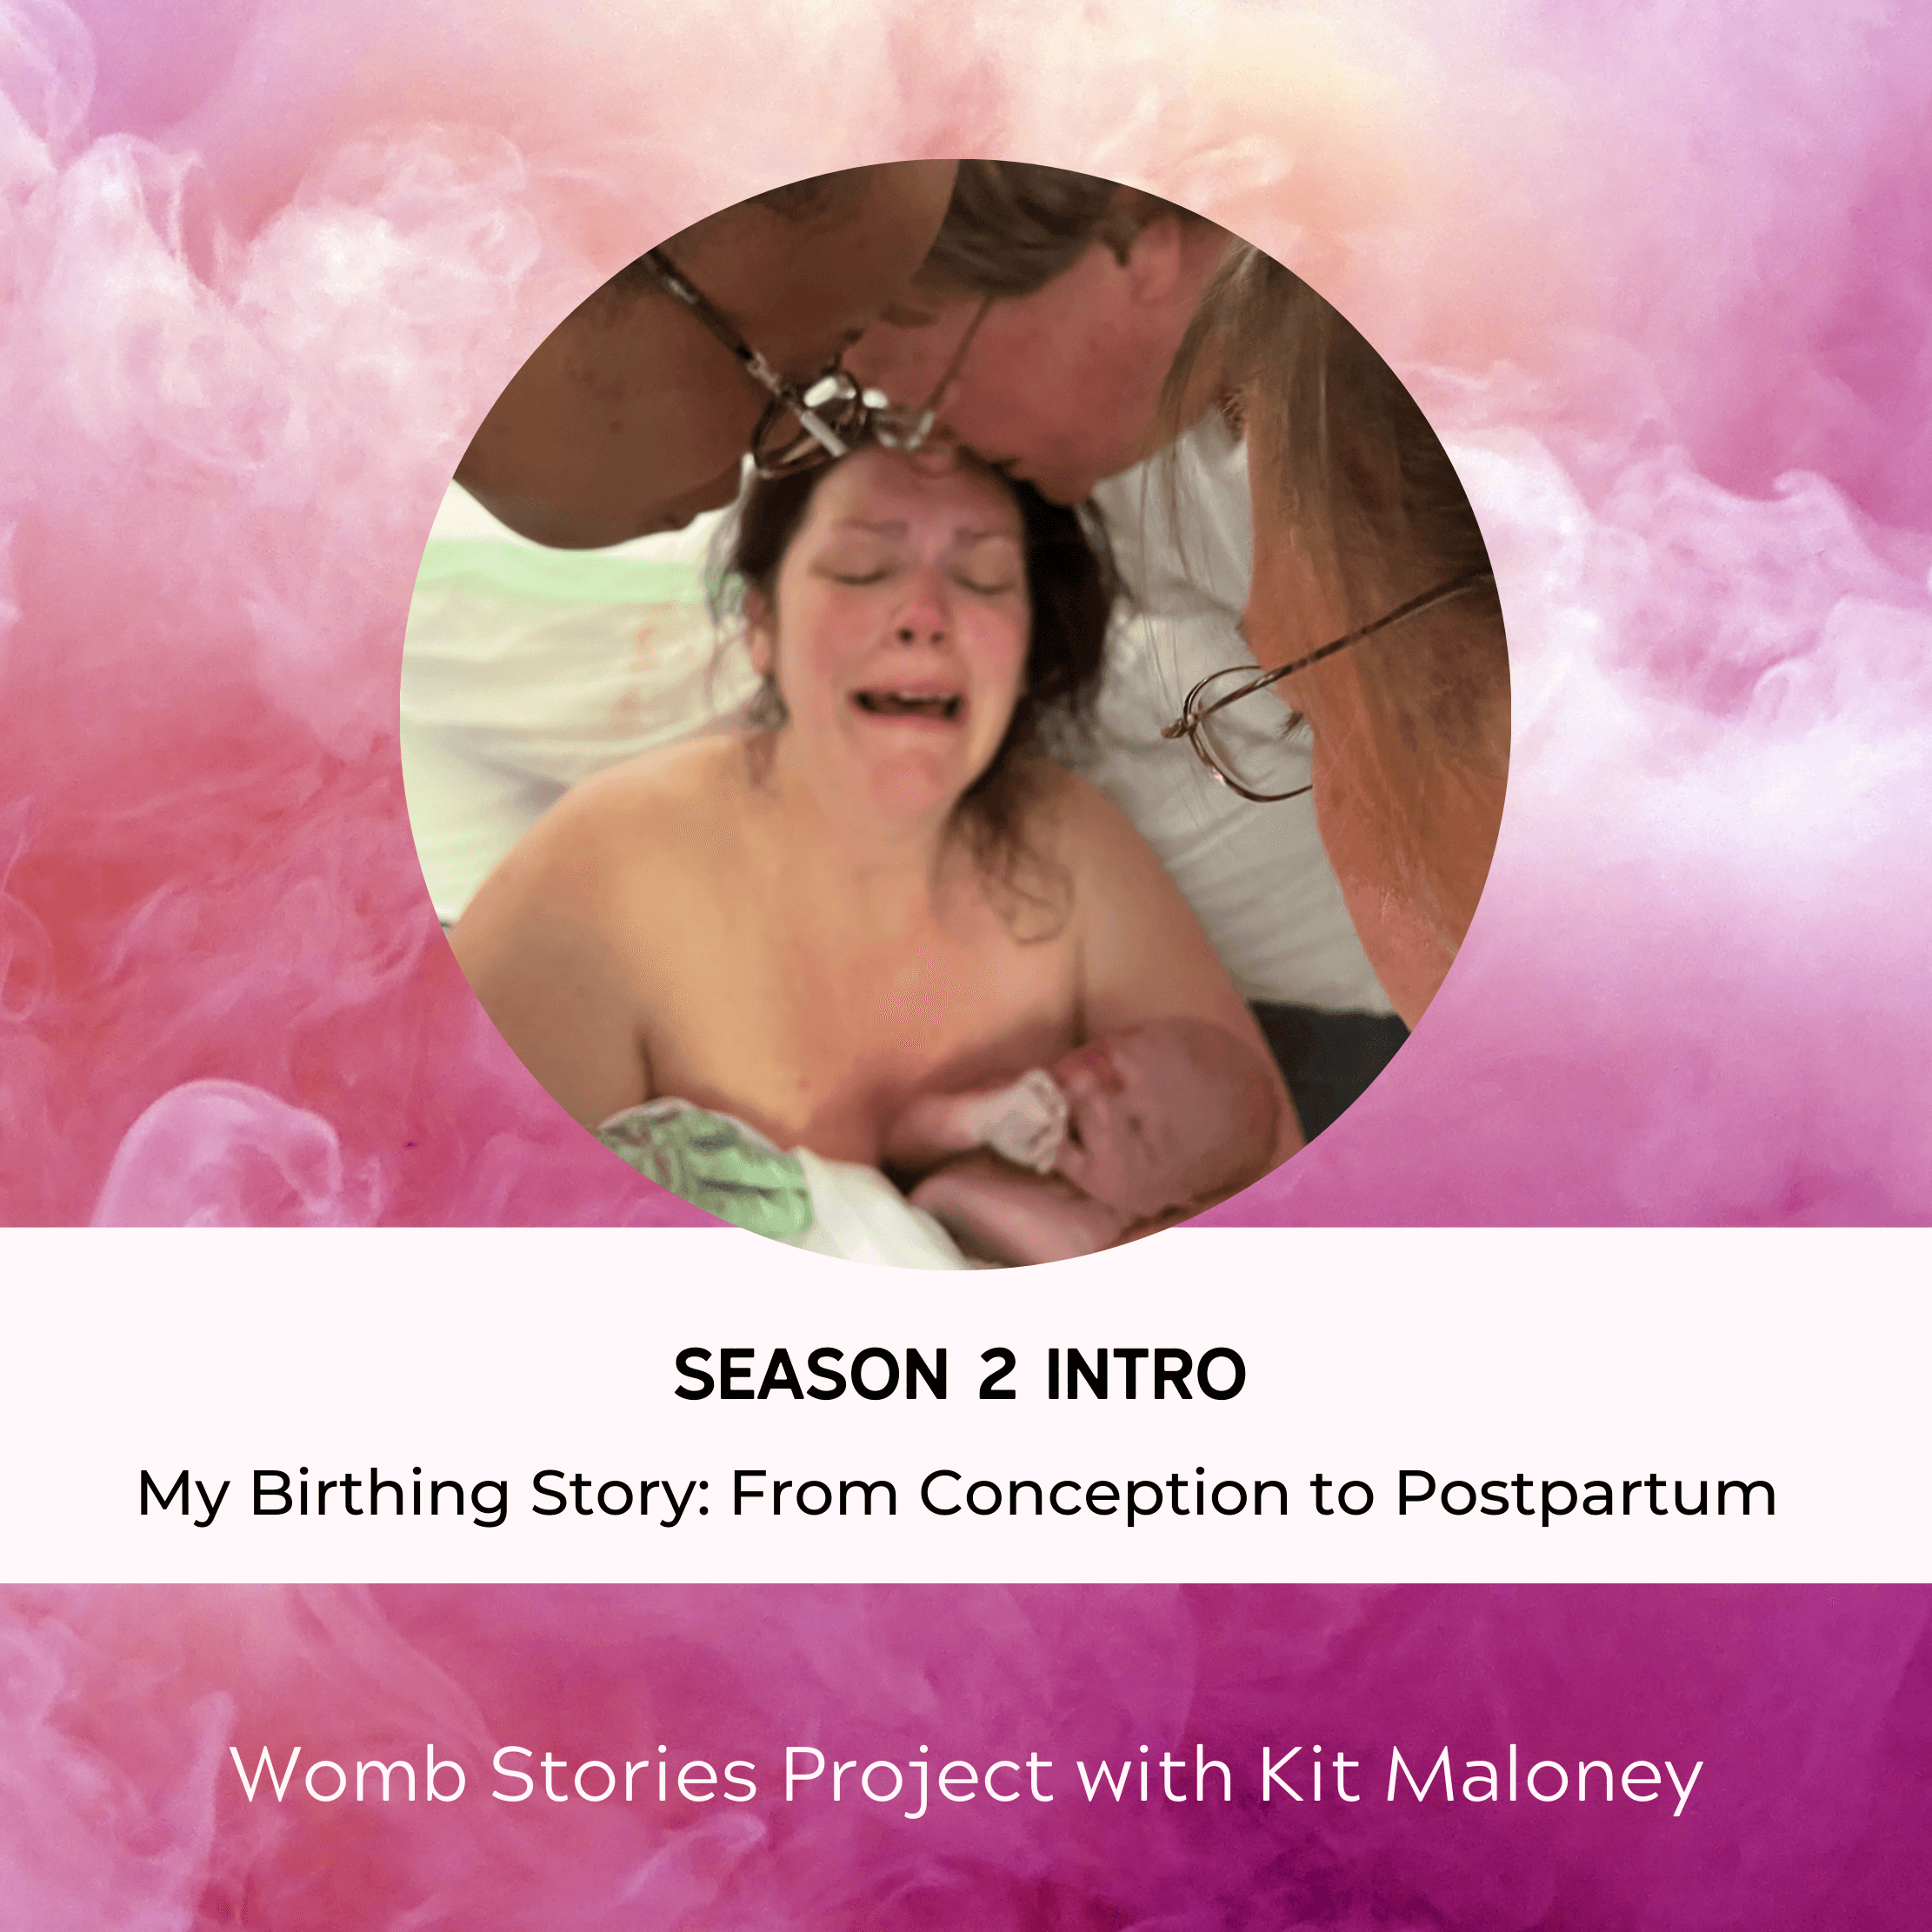 Season 2: My Birthing Story: From Conception to Postpartum